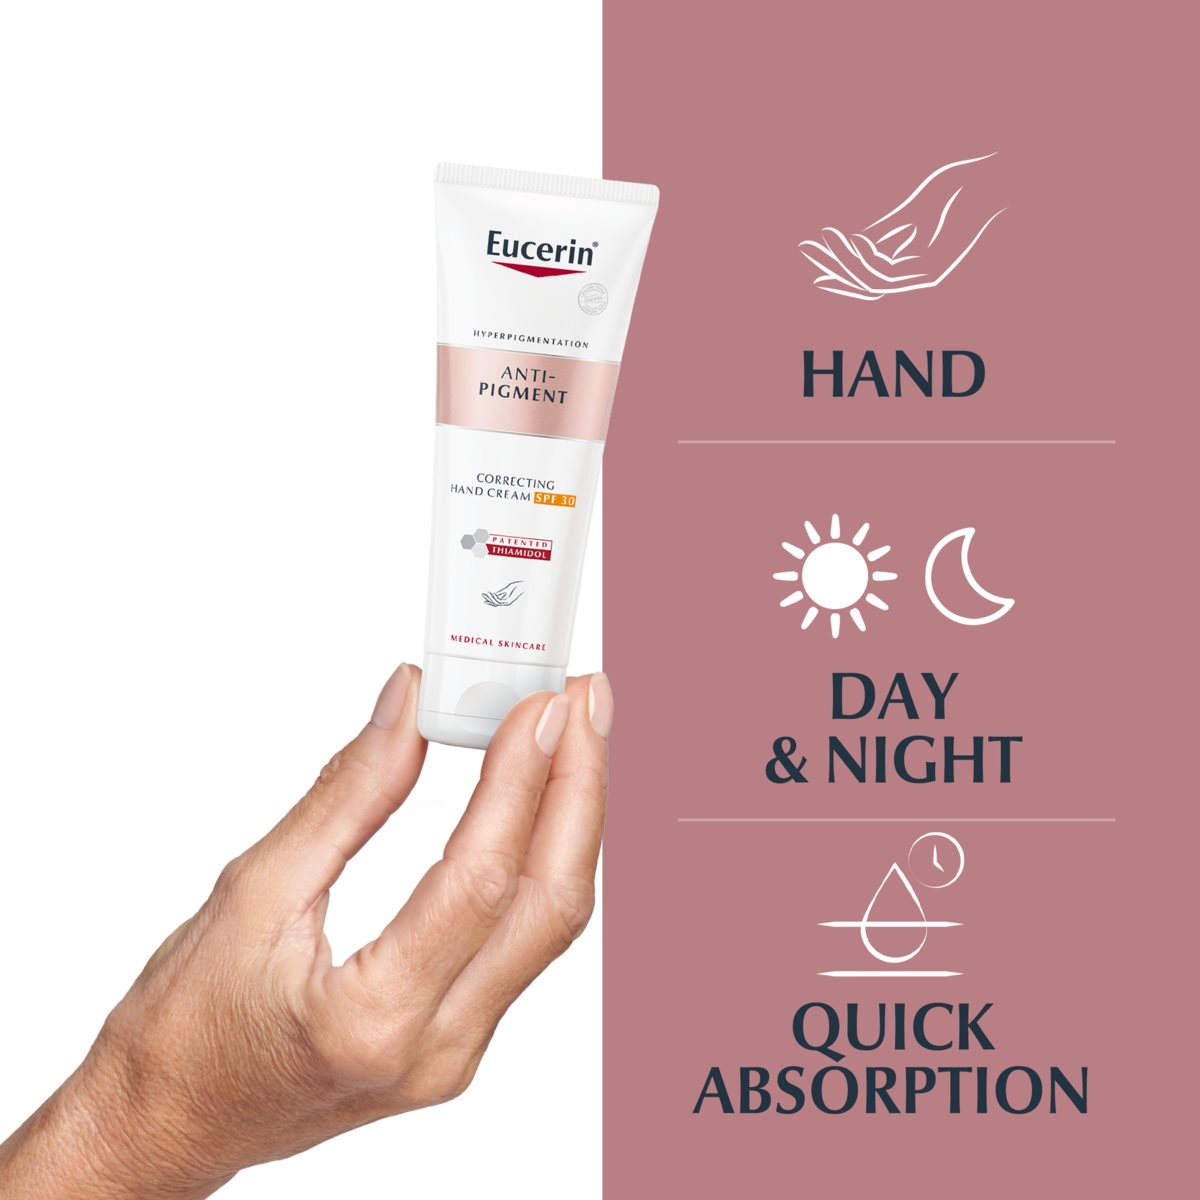 Correcting Hand cream / for reducing age spots /Anti-Pigment